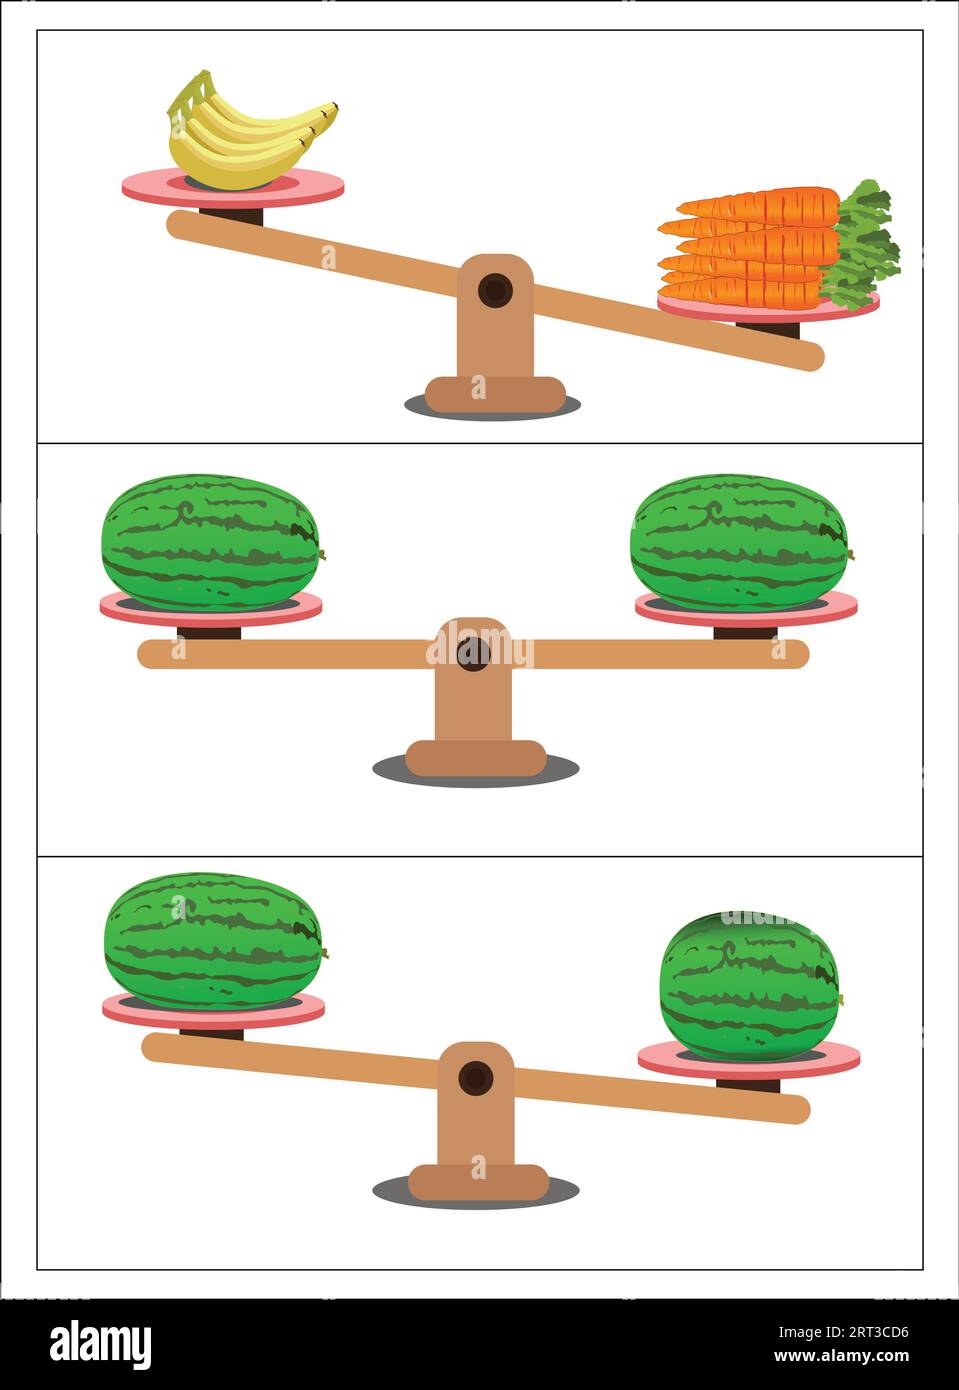 Comparison of weight in a cartoon minimal style, showing an unbalanced situation with balancing on a seesaw. Vector illustration. Stock Vector